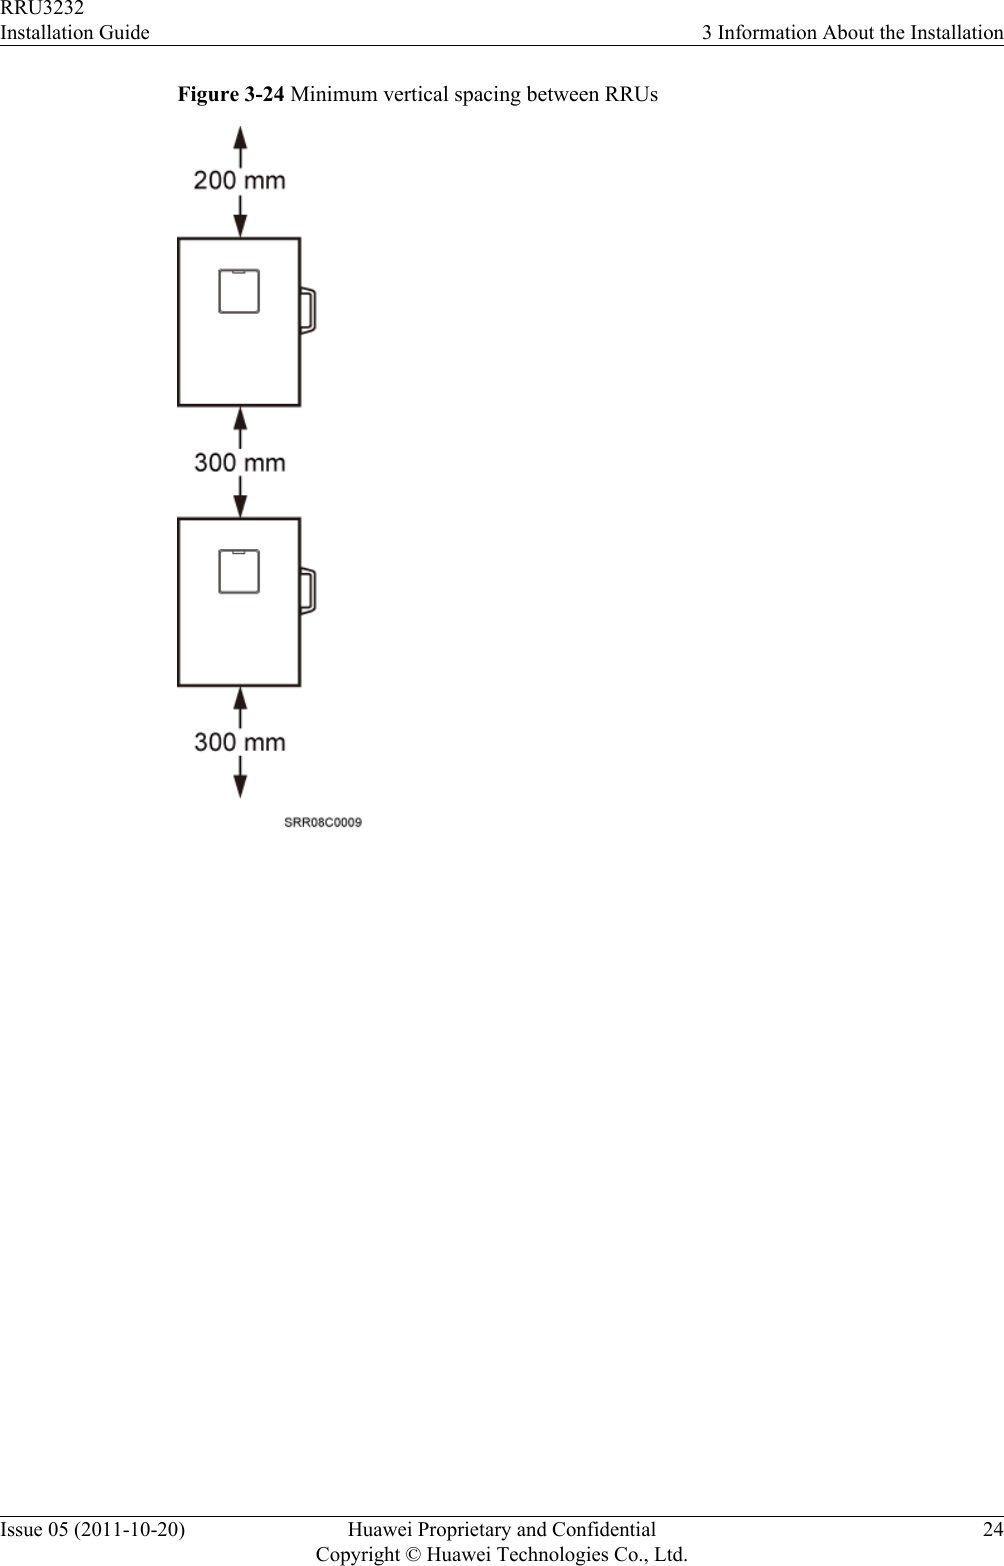 Figure 3-24 Minimum vertical spacing between RRUsRRU3232Installation Guide 3 Information About the InstallationIssue 05 (2011-10-20) Huawei Proprietary and ConfidentialCopyright © Huawei Technologies Co., Ltd.24